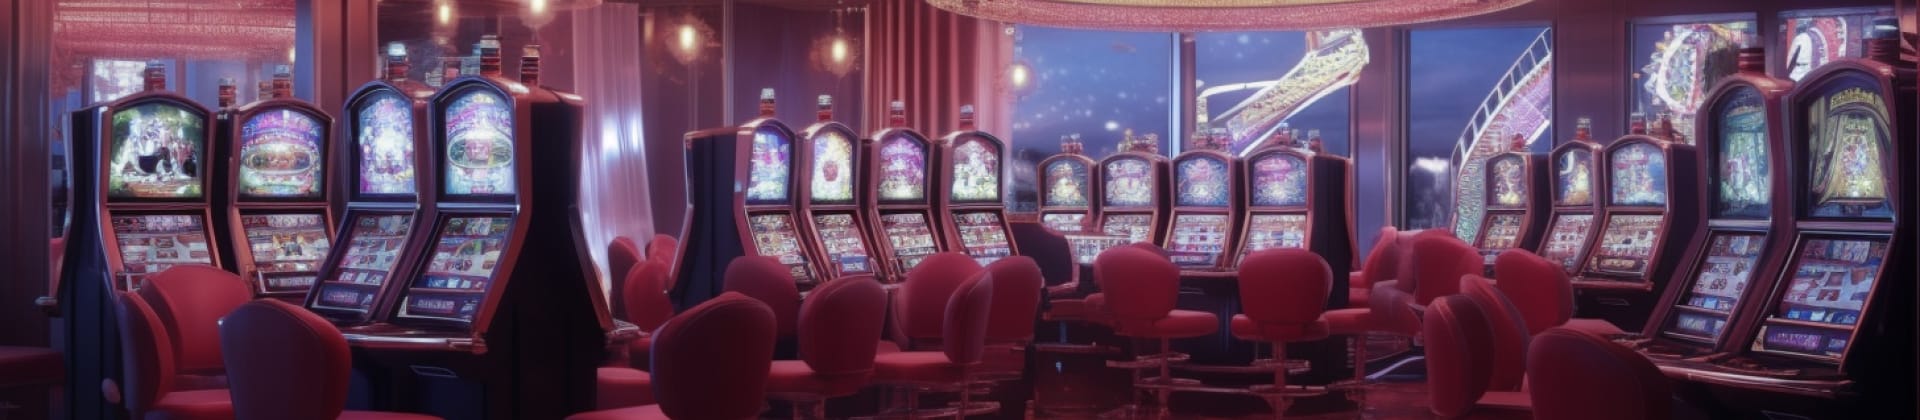 Litecoin casinos game selections are outstanding